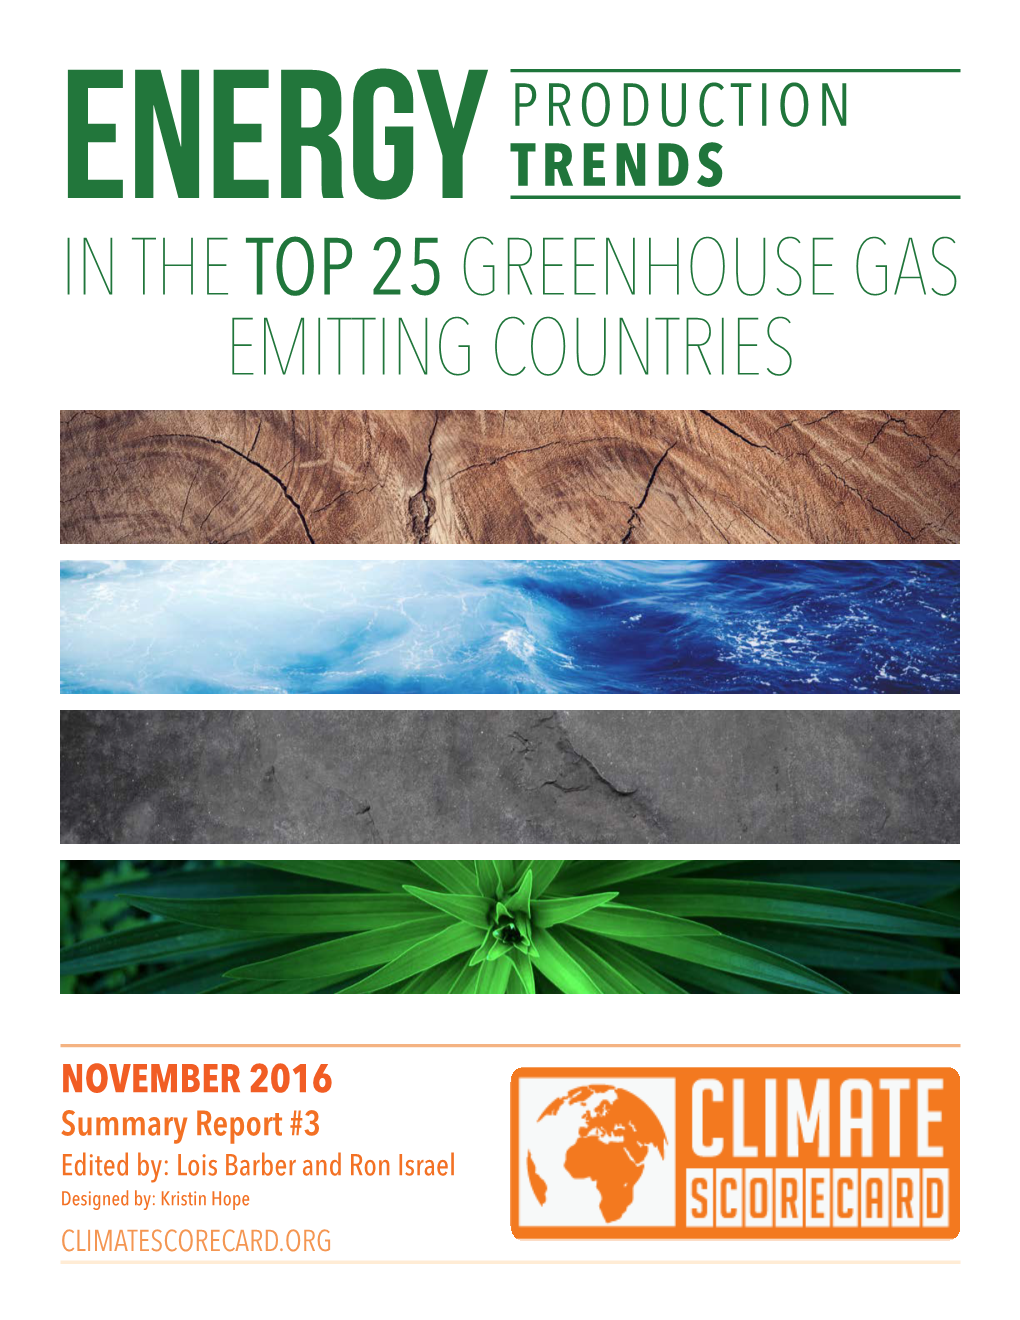 In the Top 25 Greenhouse Gas Emitting Countries